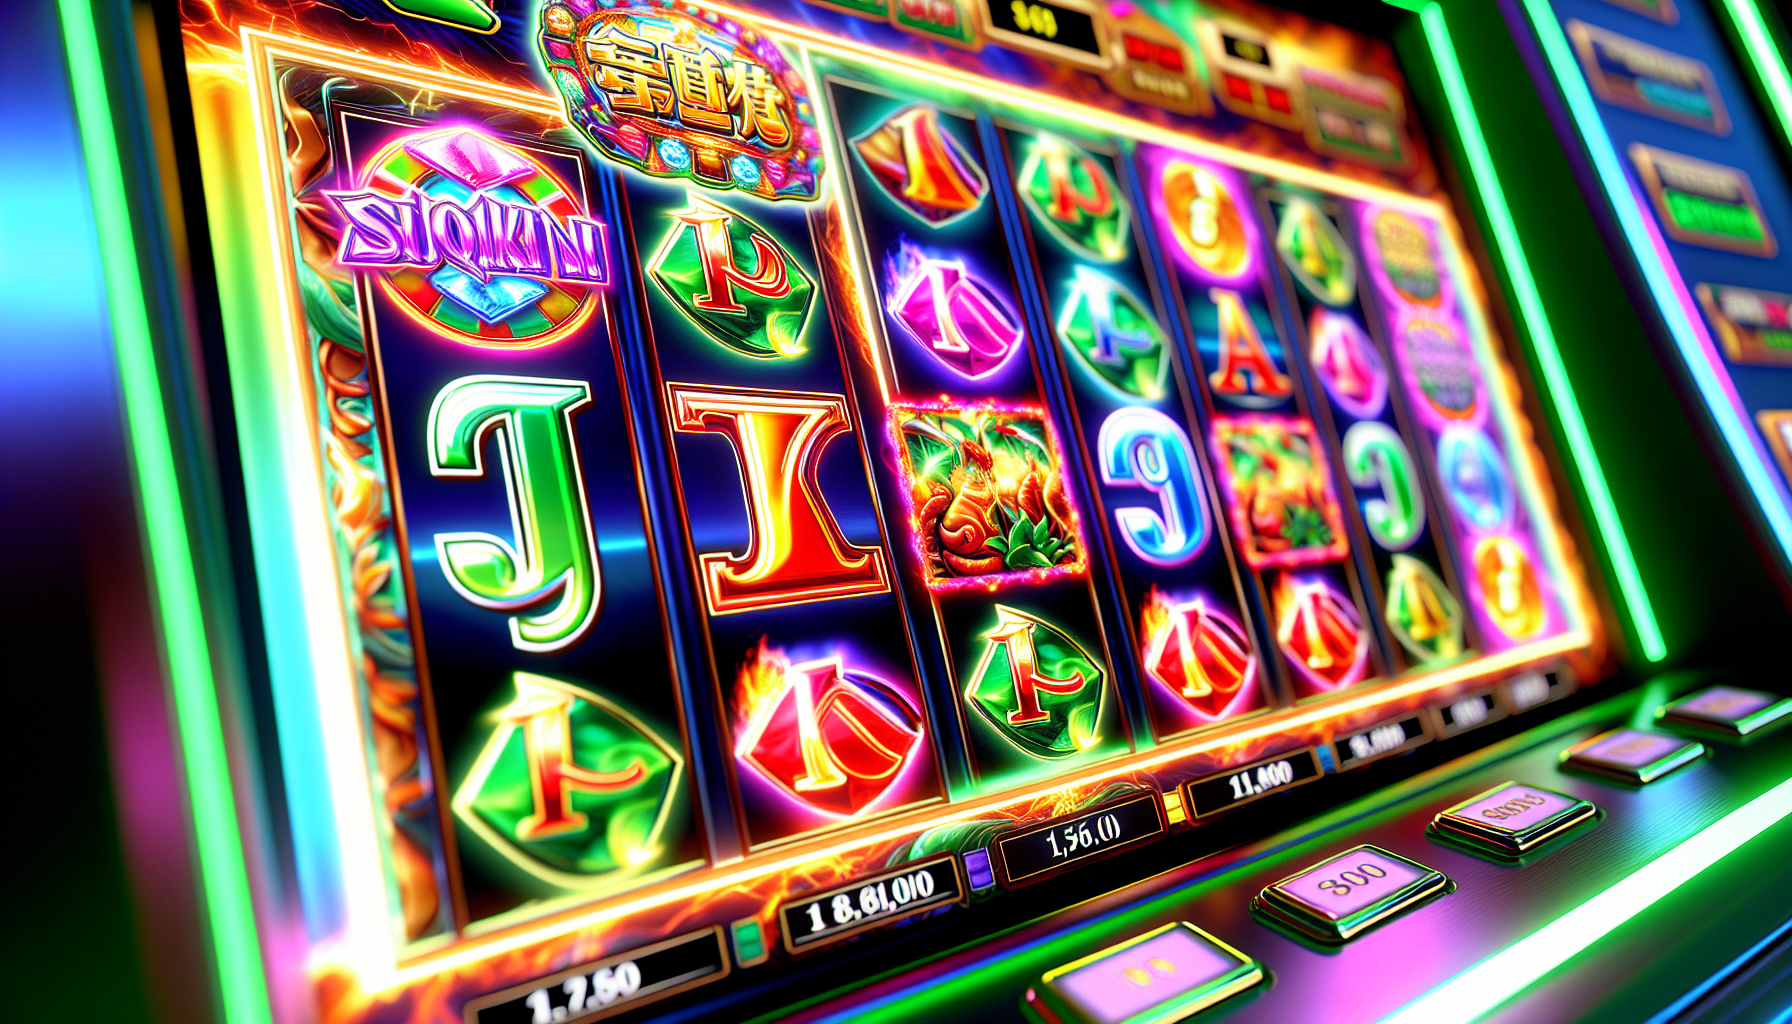 Exciting real money slot games